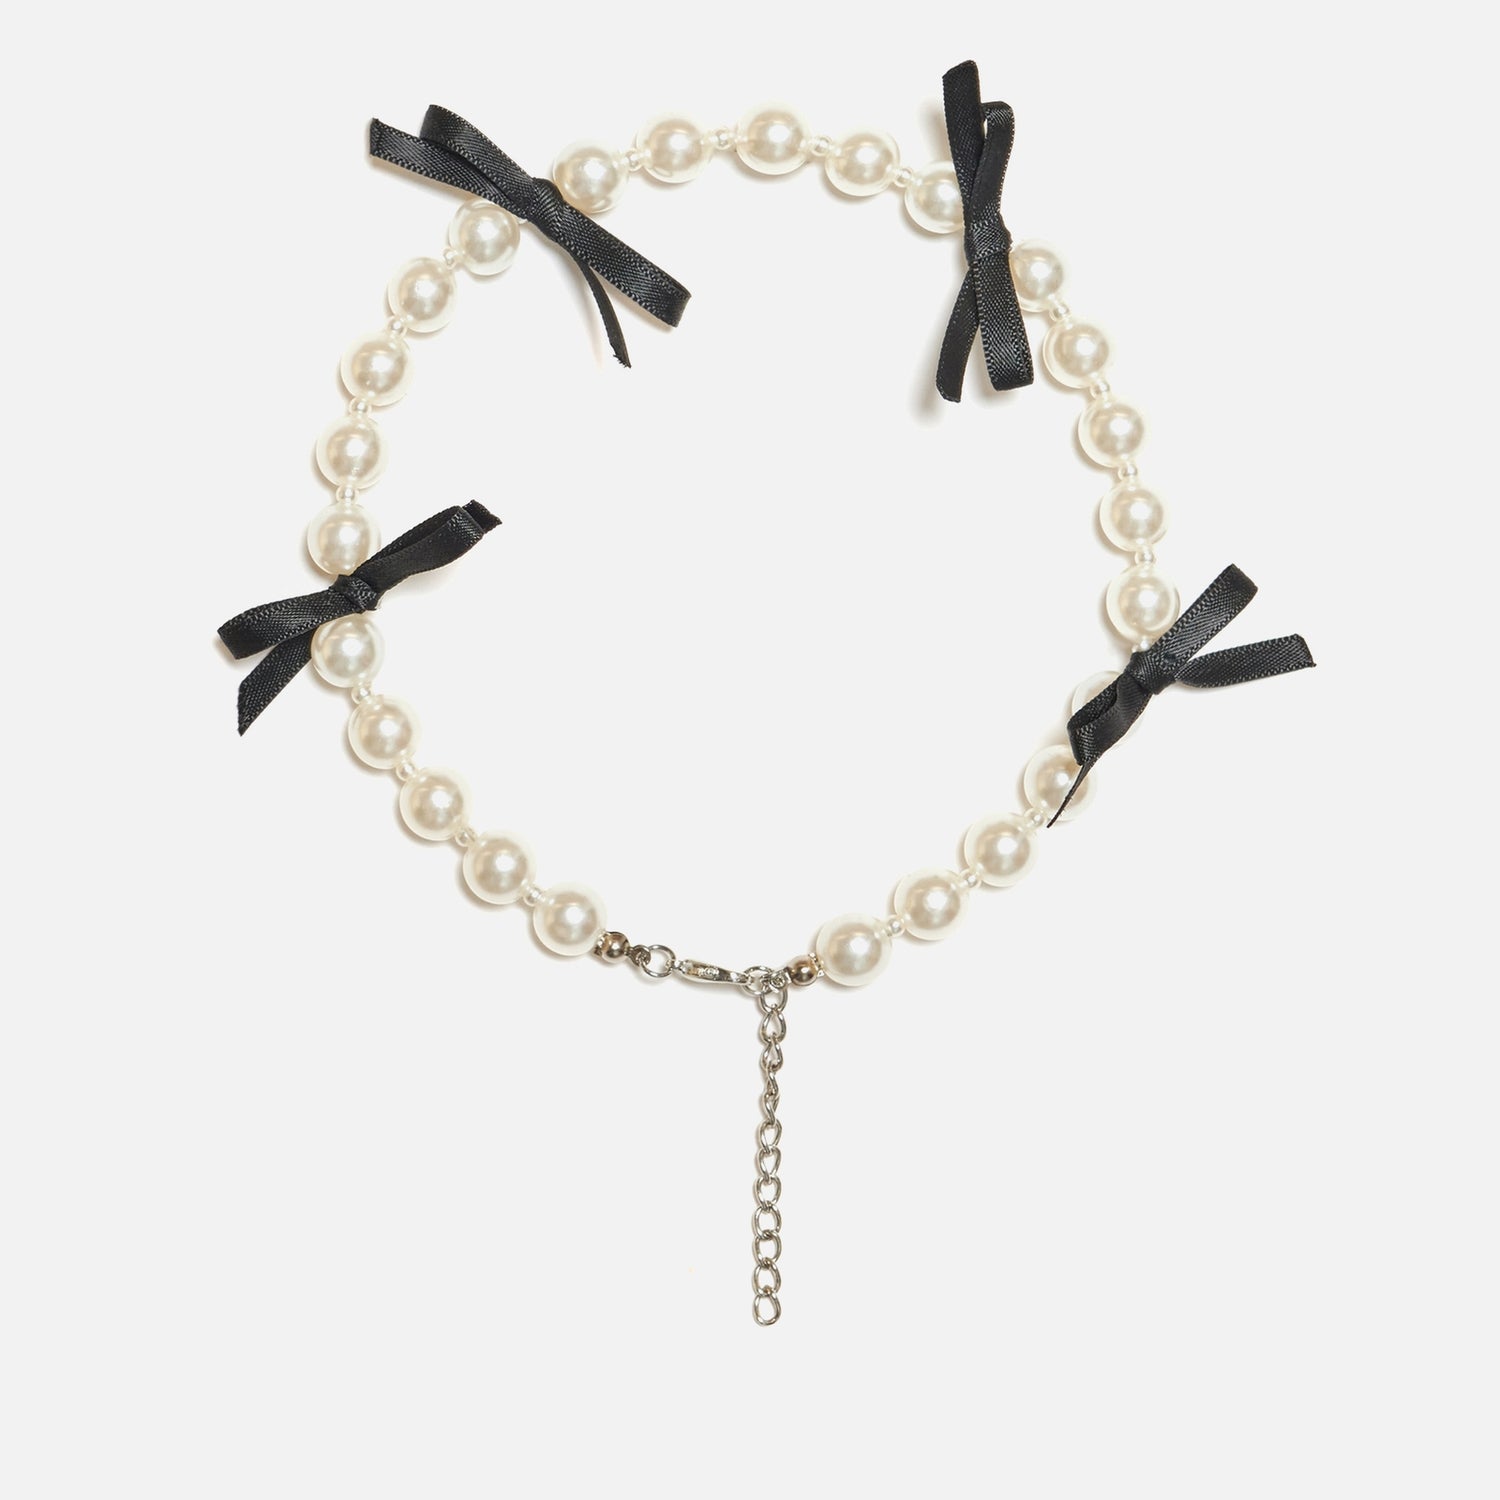 Sister Jane Dasha Faux Pearl Bow Necklace